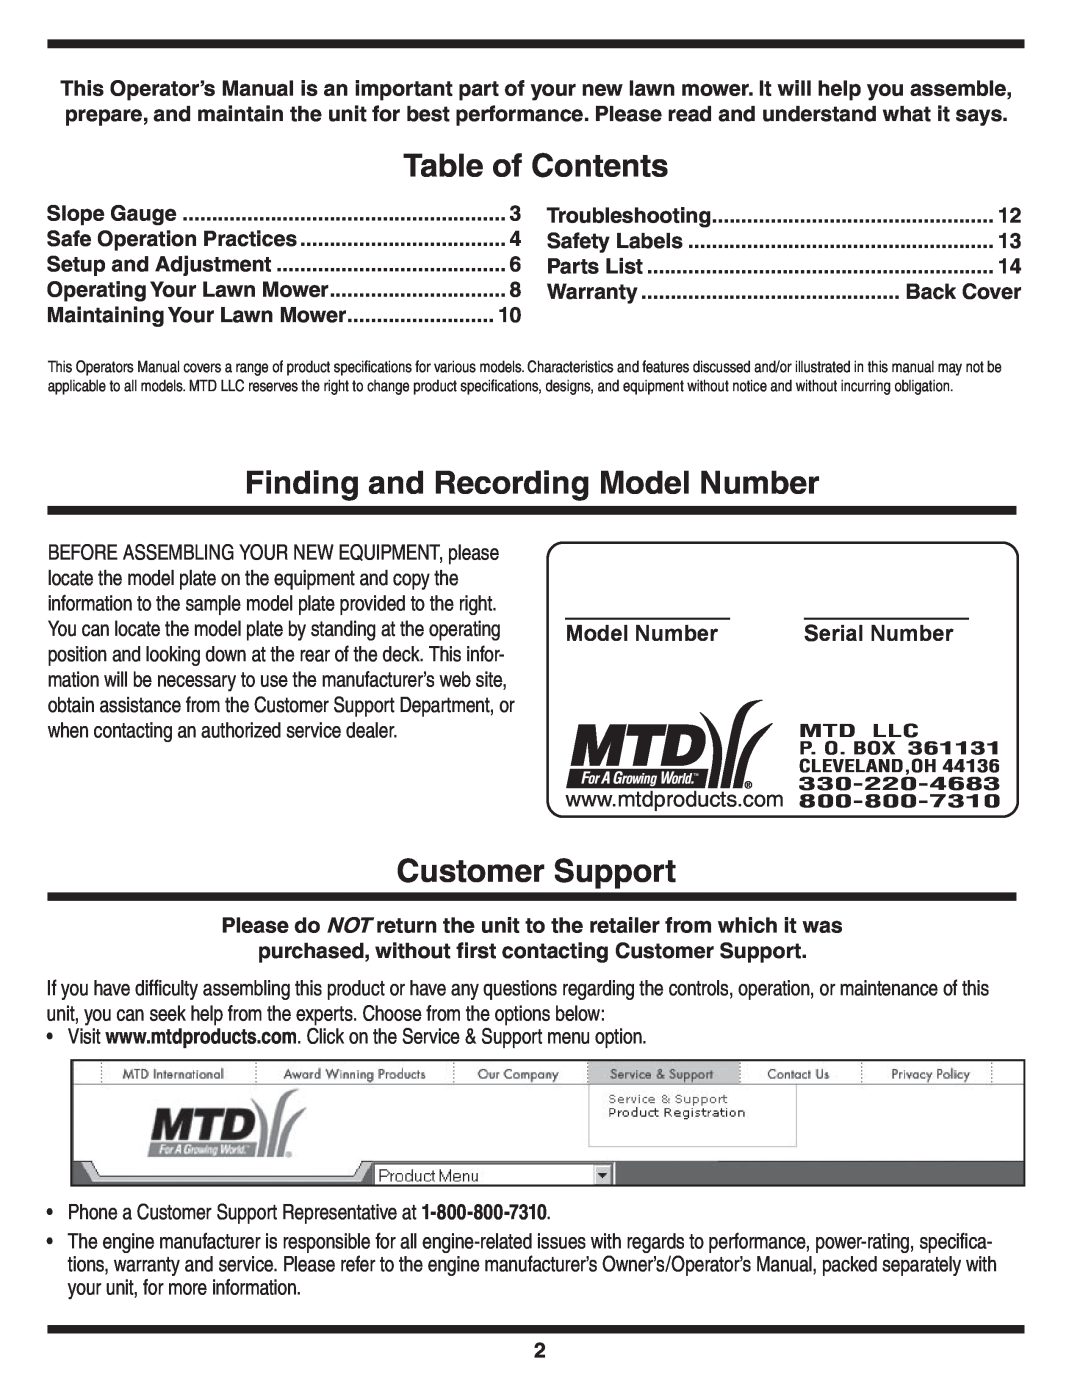 MTD Series 430 warranty Table of Contents, Finding and Recording Model Number, Customer Support, Serial Number 